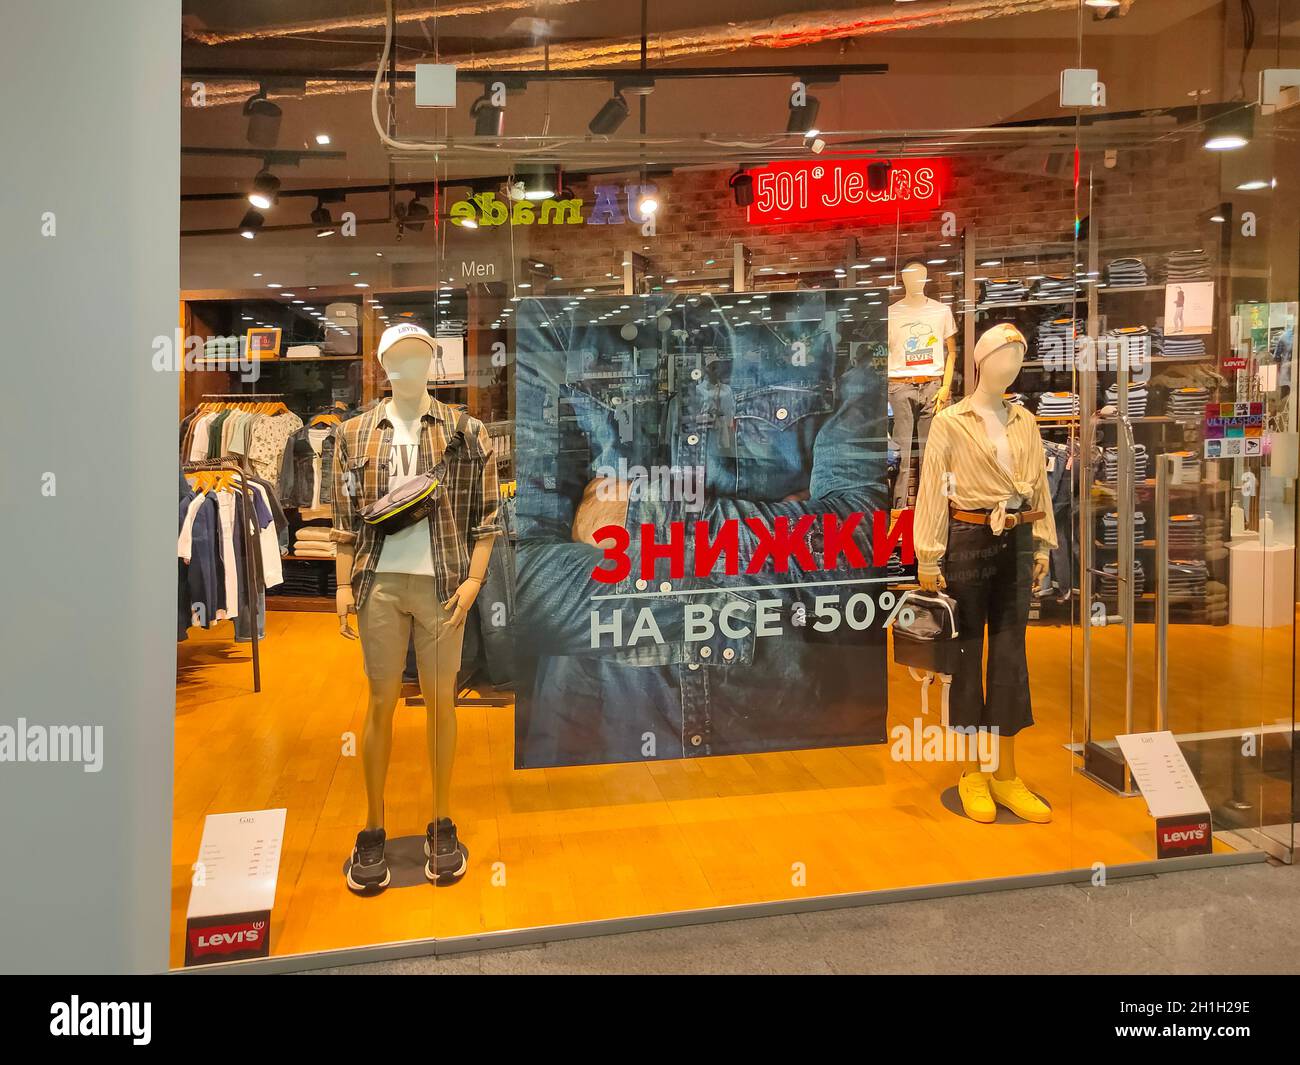 Kiyv, Ukraine - August 2, 2020: Shoppers walk past a Levi's retail clothing  store at Kiyv, Ukraine on August 2, 2020. Levi Strauss and Co is a private  Stock Photo - Alamy